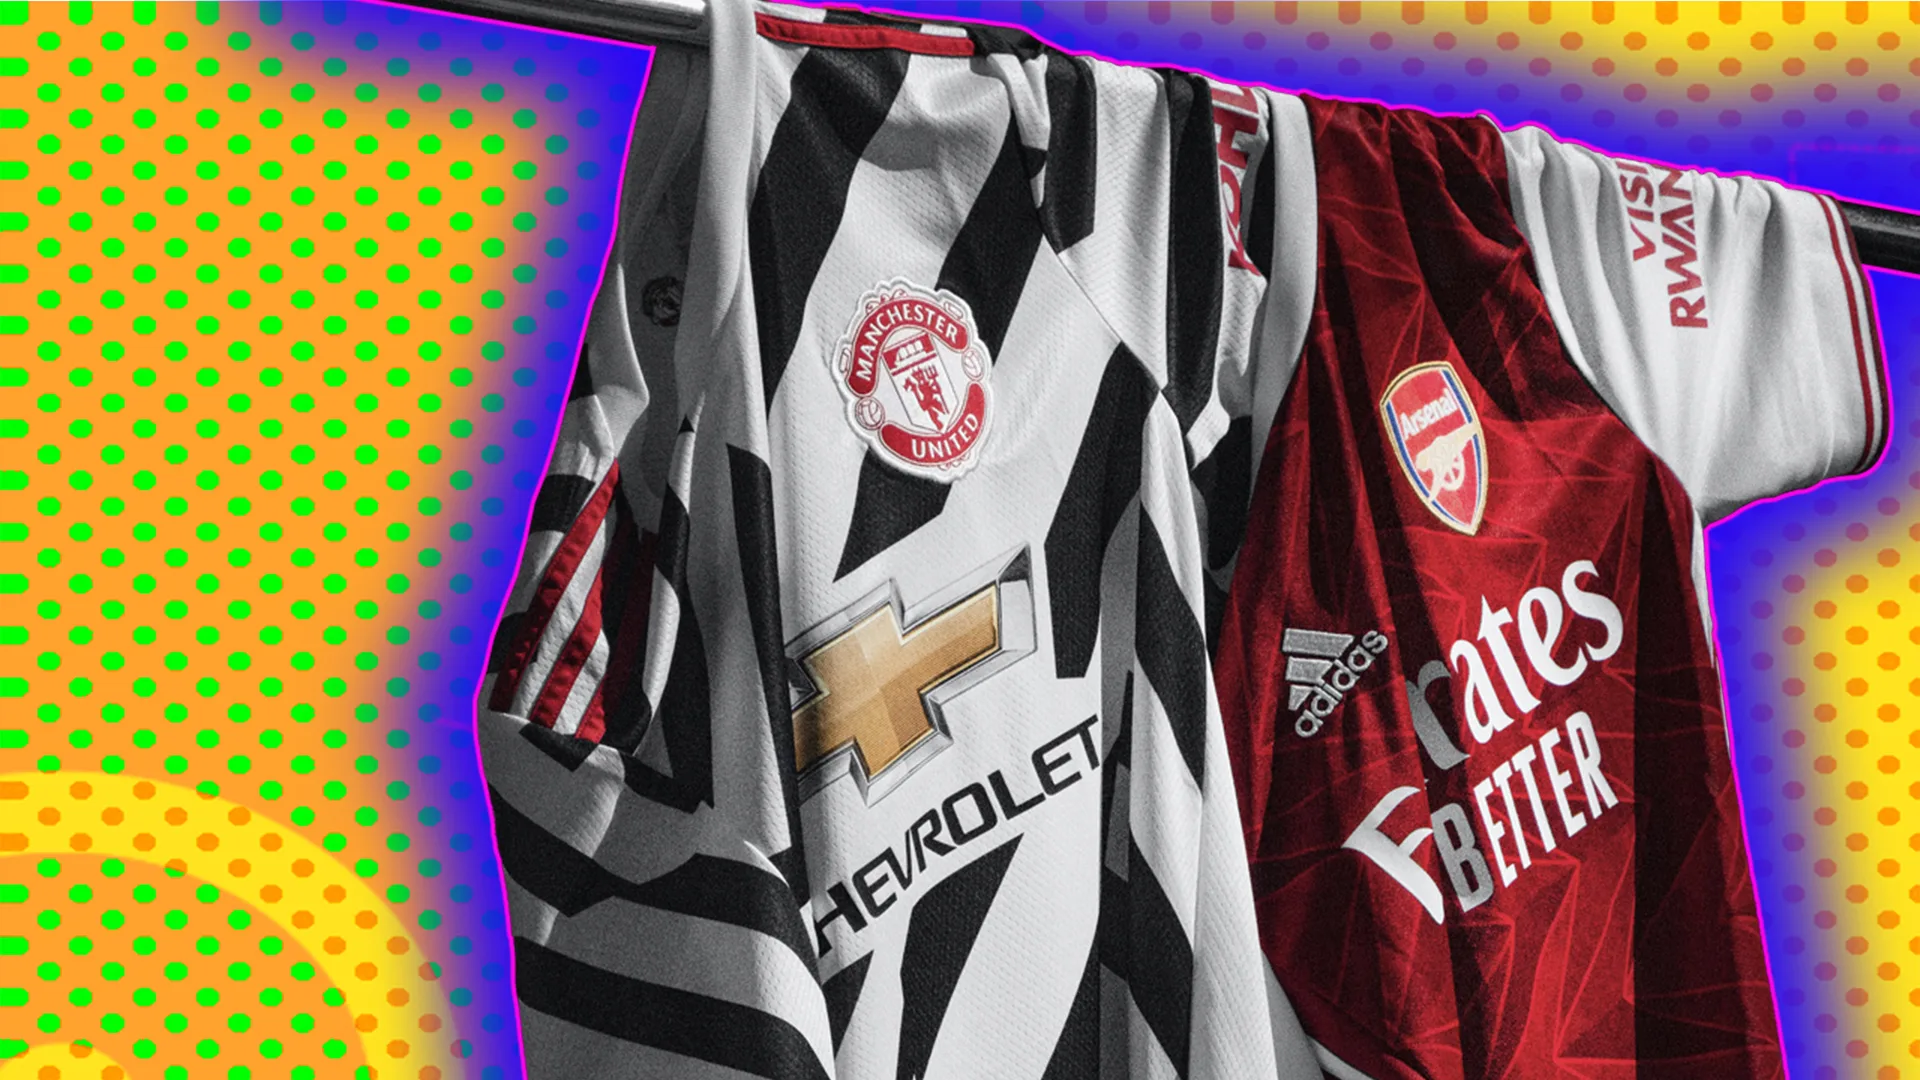 Two football shirts, Manchester and Arsenal, hanging on a pole, with a yellow textured background outlined by a blue hat effect